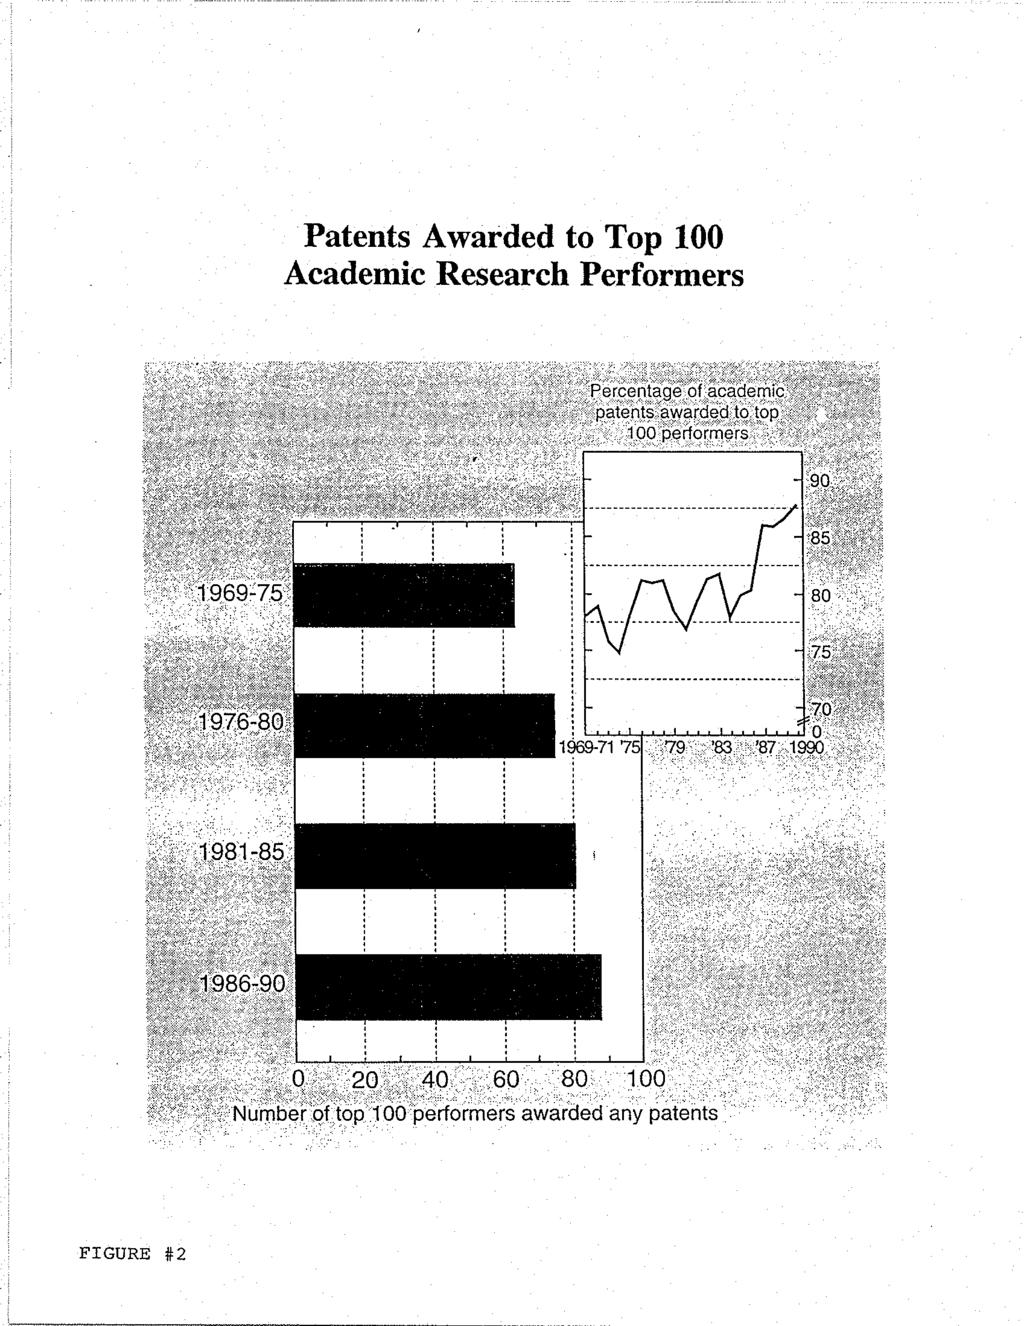 FIGURE #2 Patents Awarded to Top